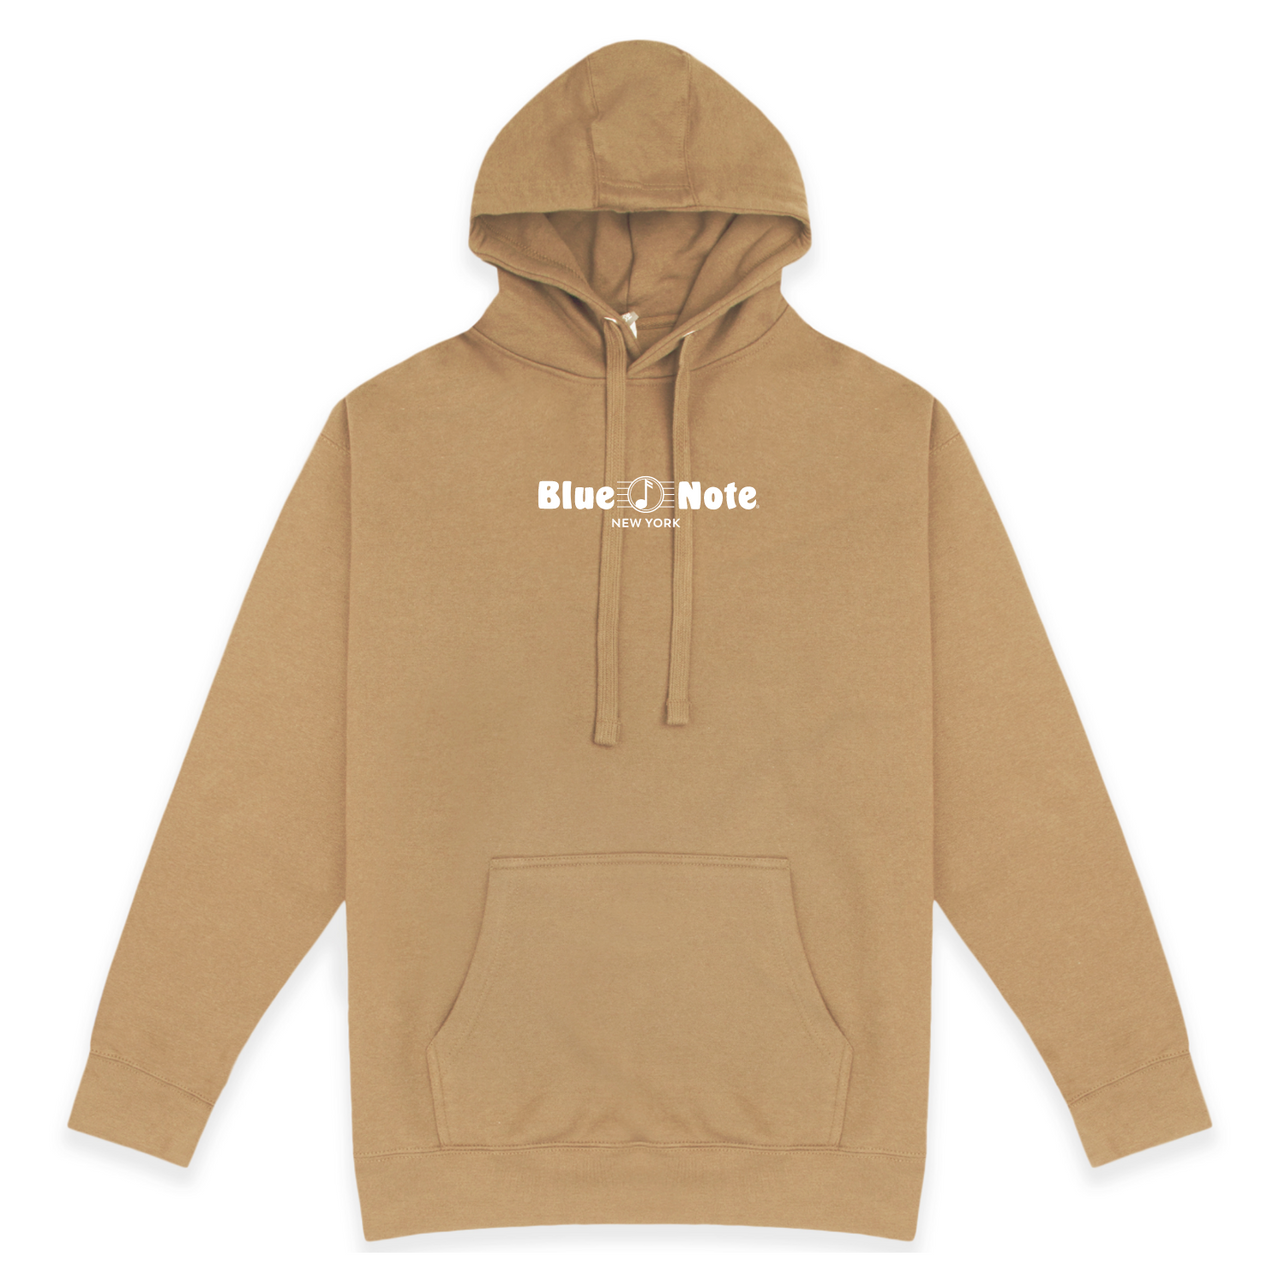 Latte and Khaki Blue Note Hoodie